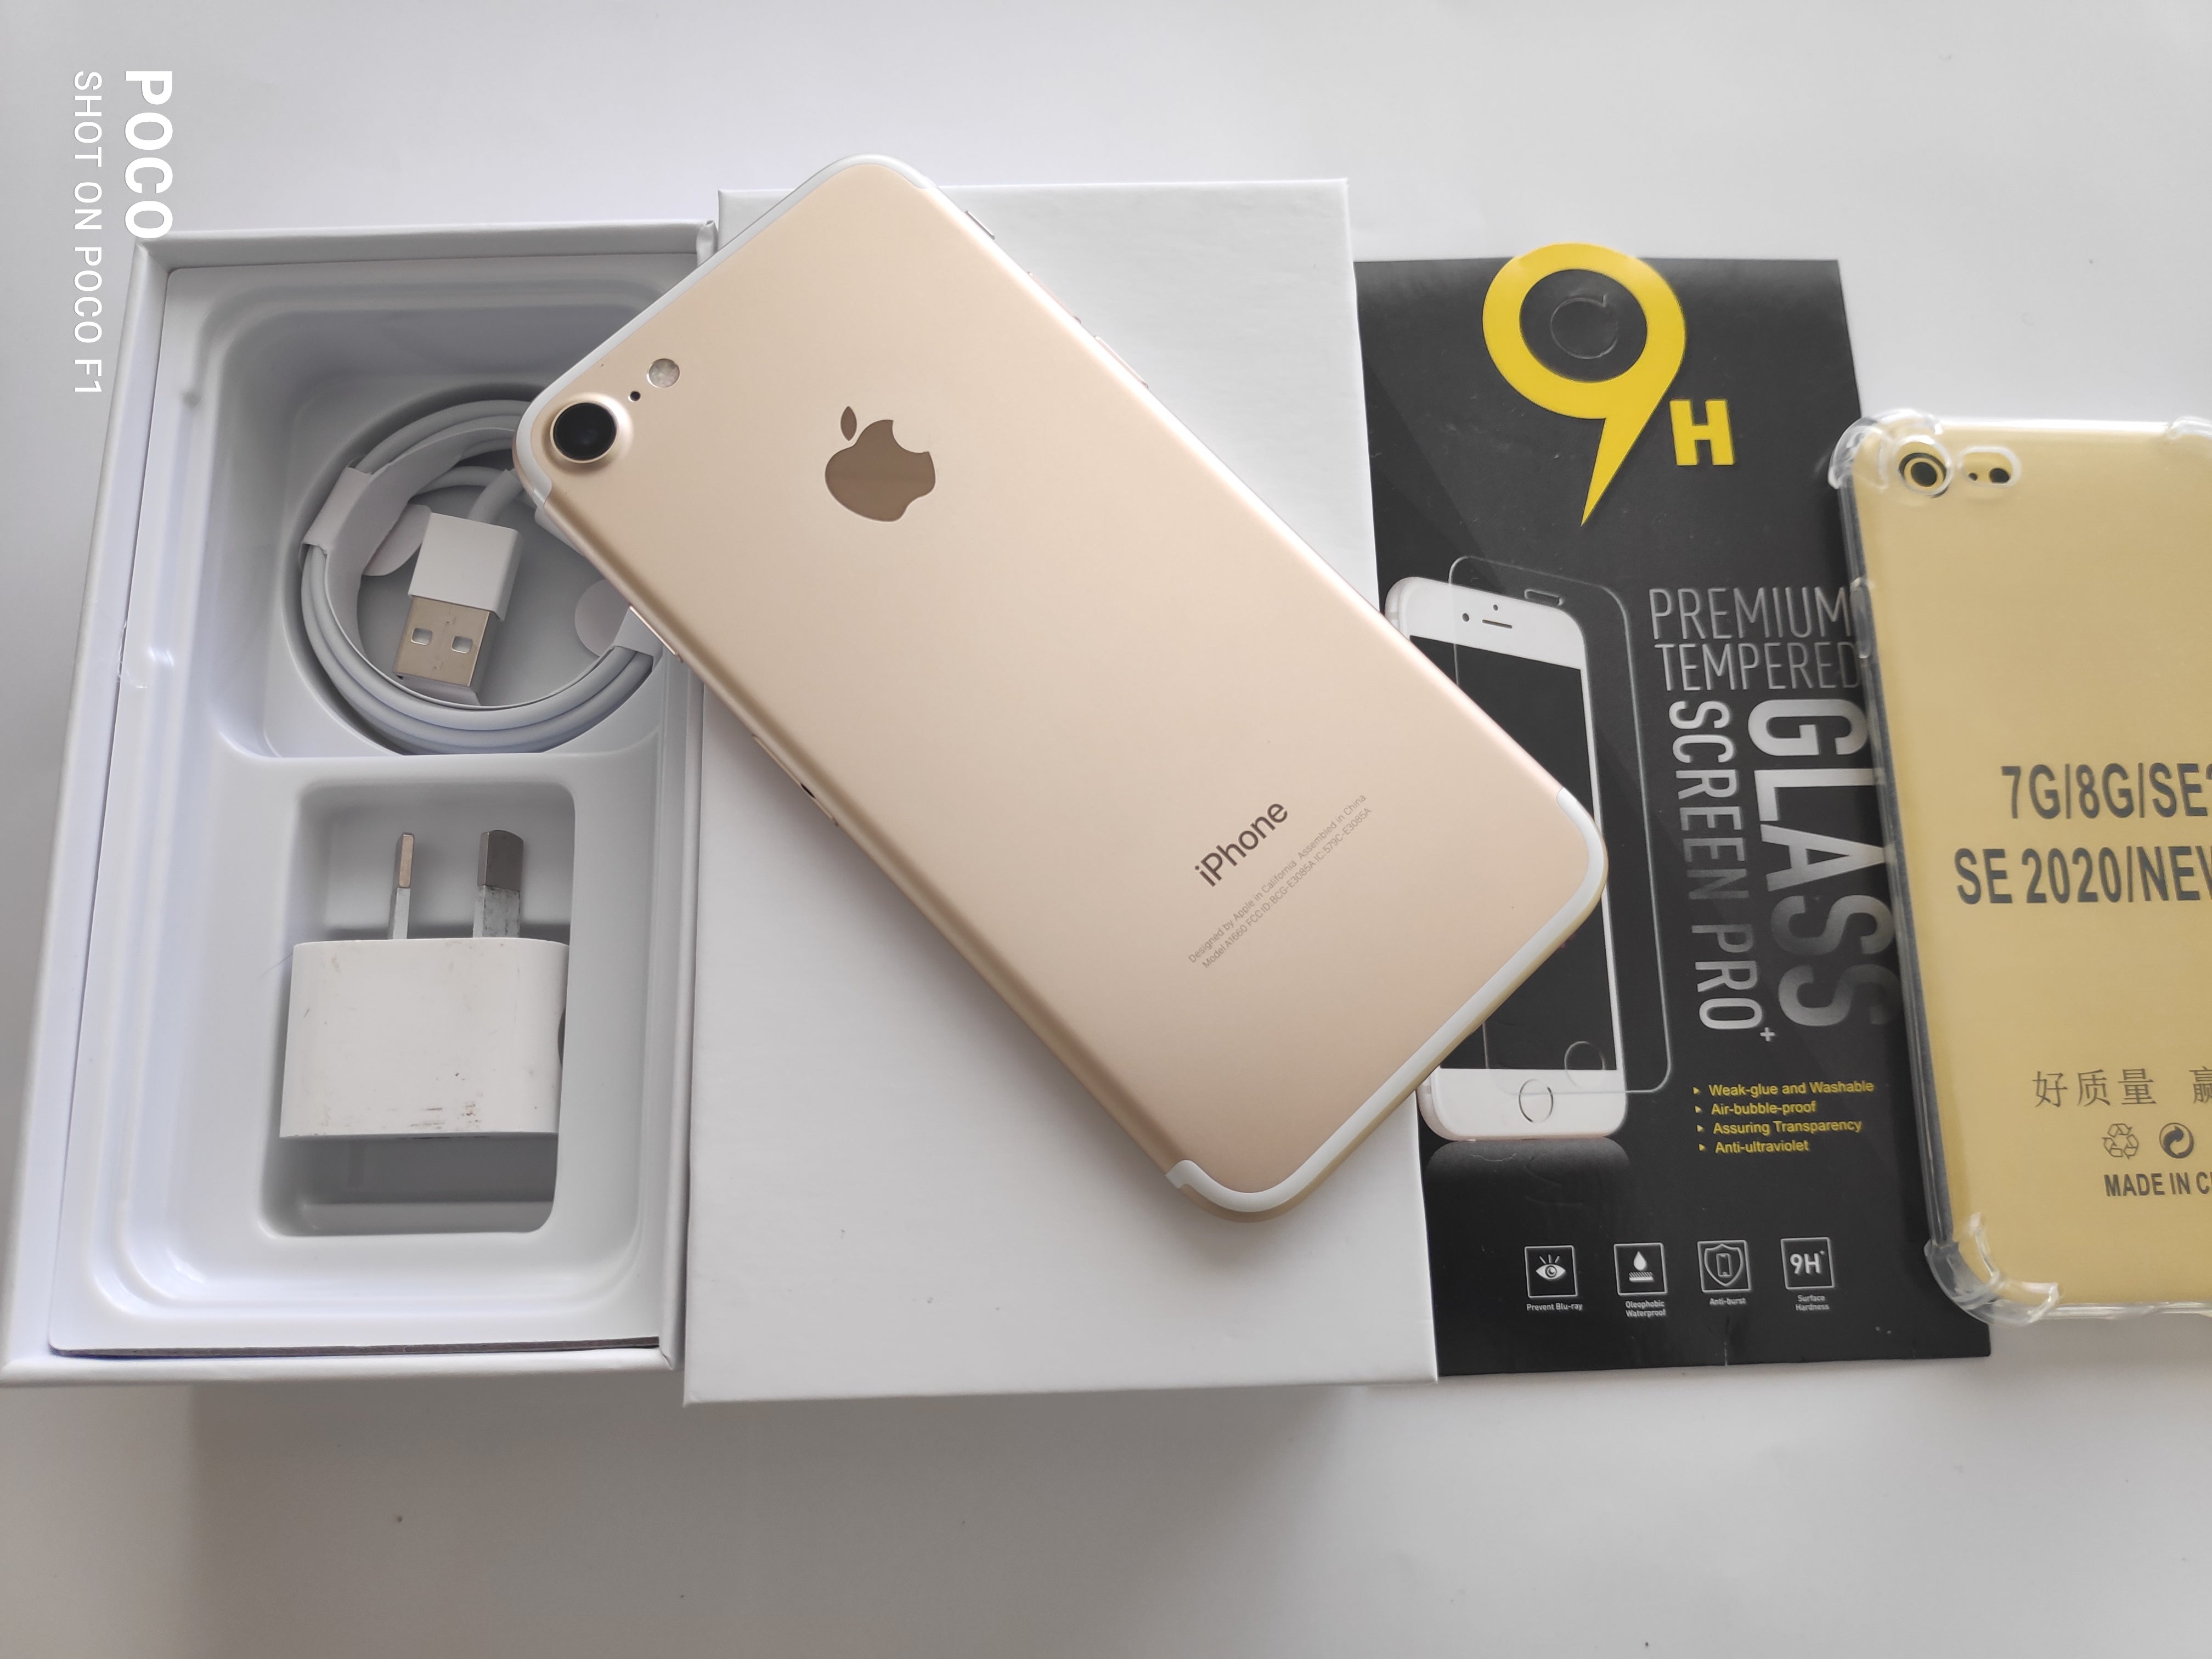 Apple iPhone 7 32GB Space Gold - New Battery, Case, Glass Screen Protector & Shipping (As New)